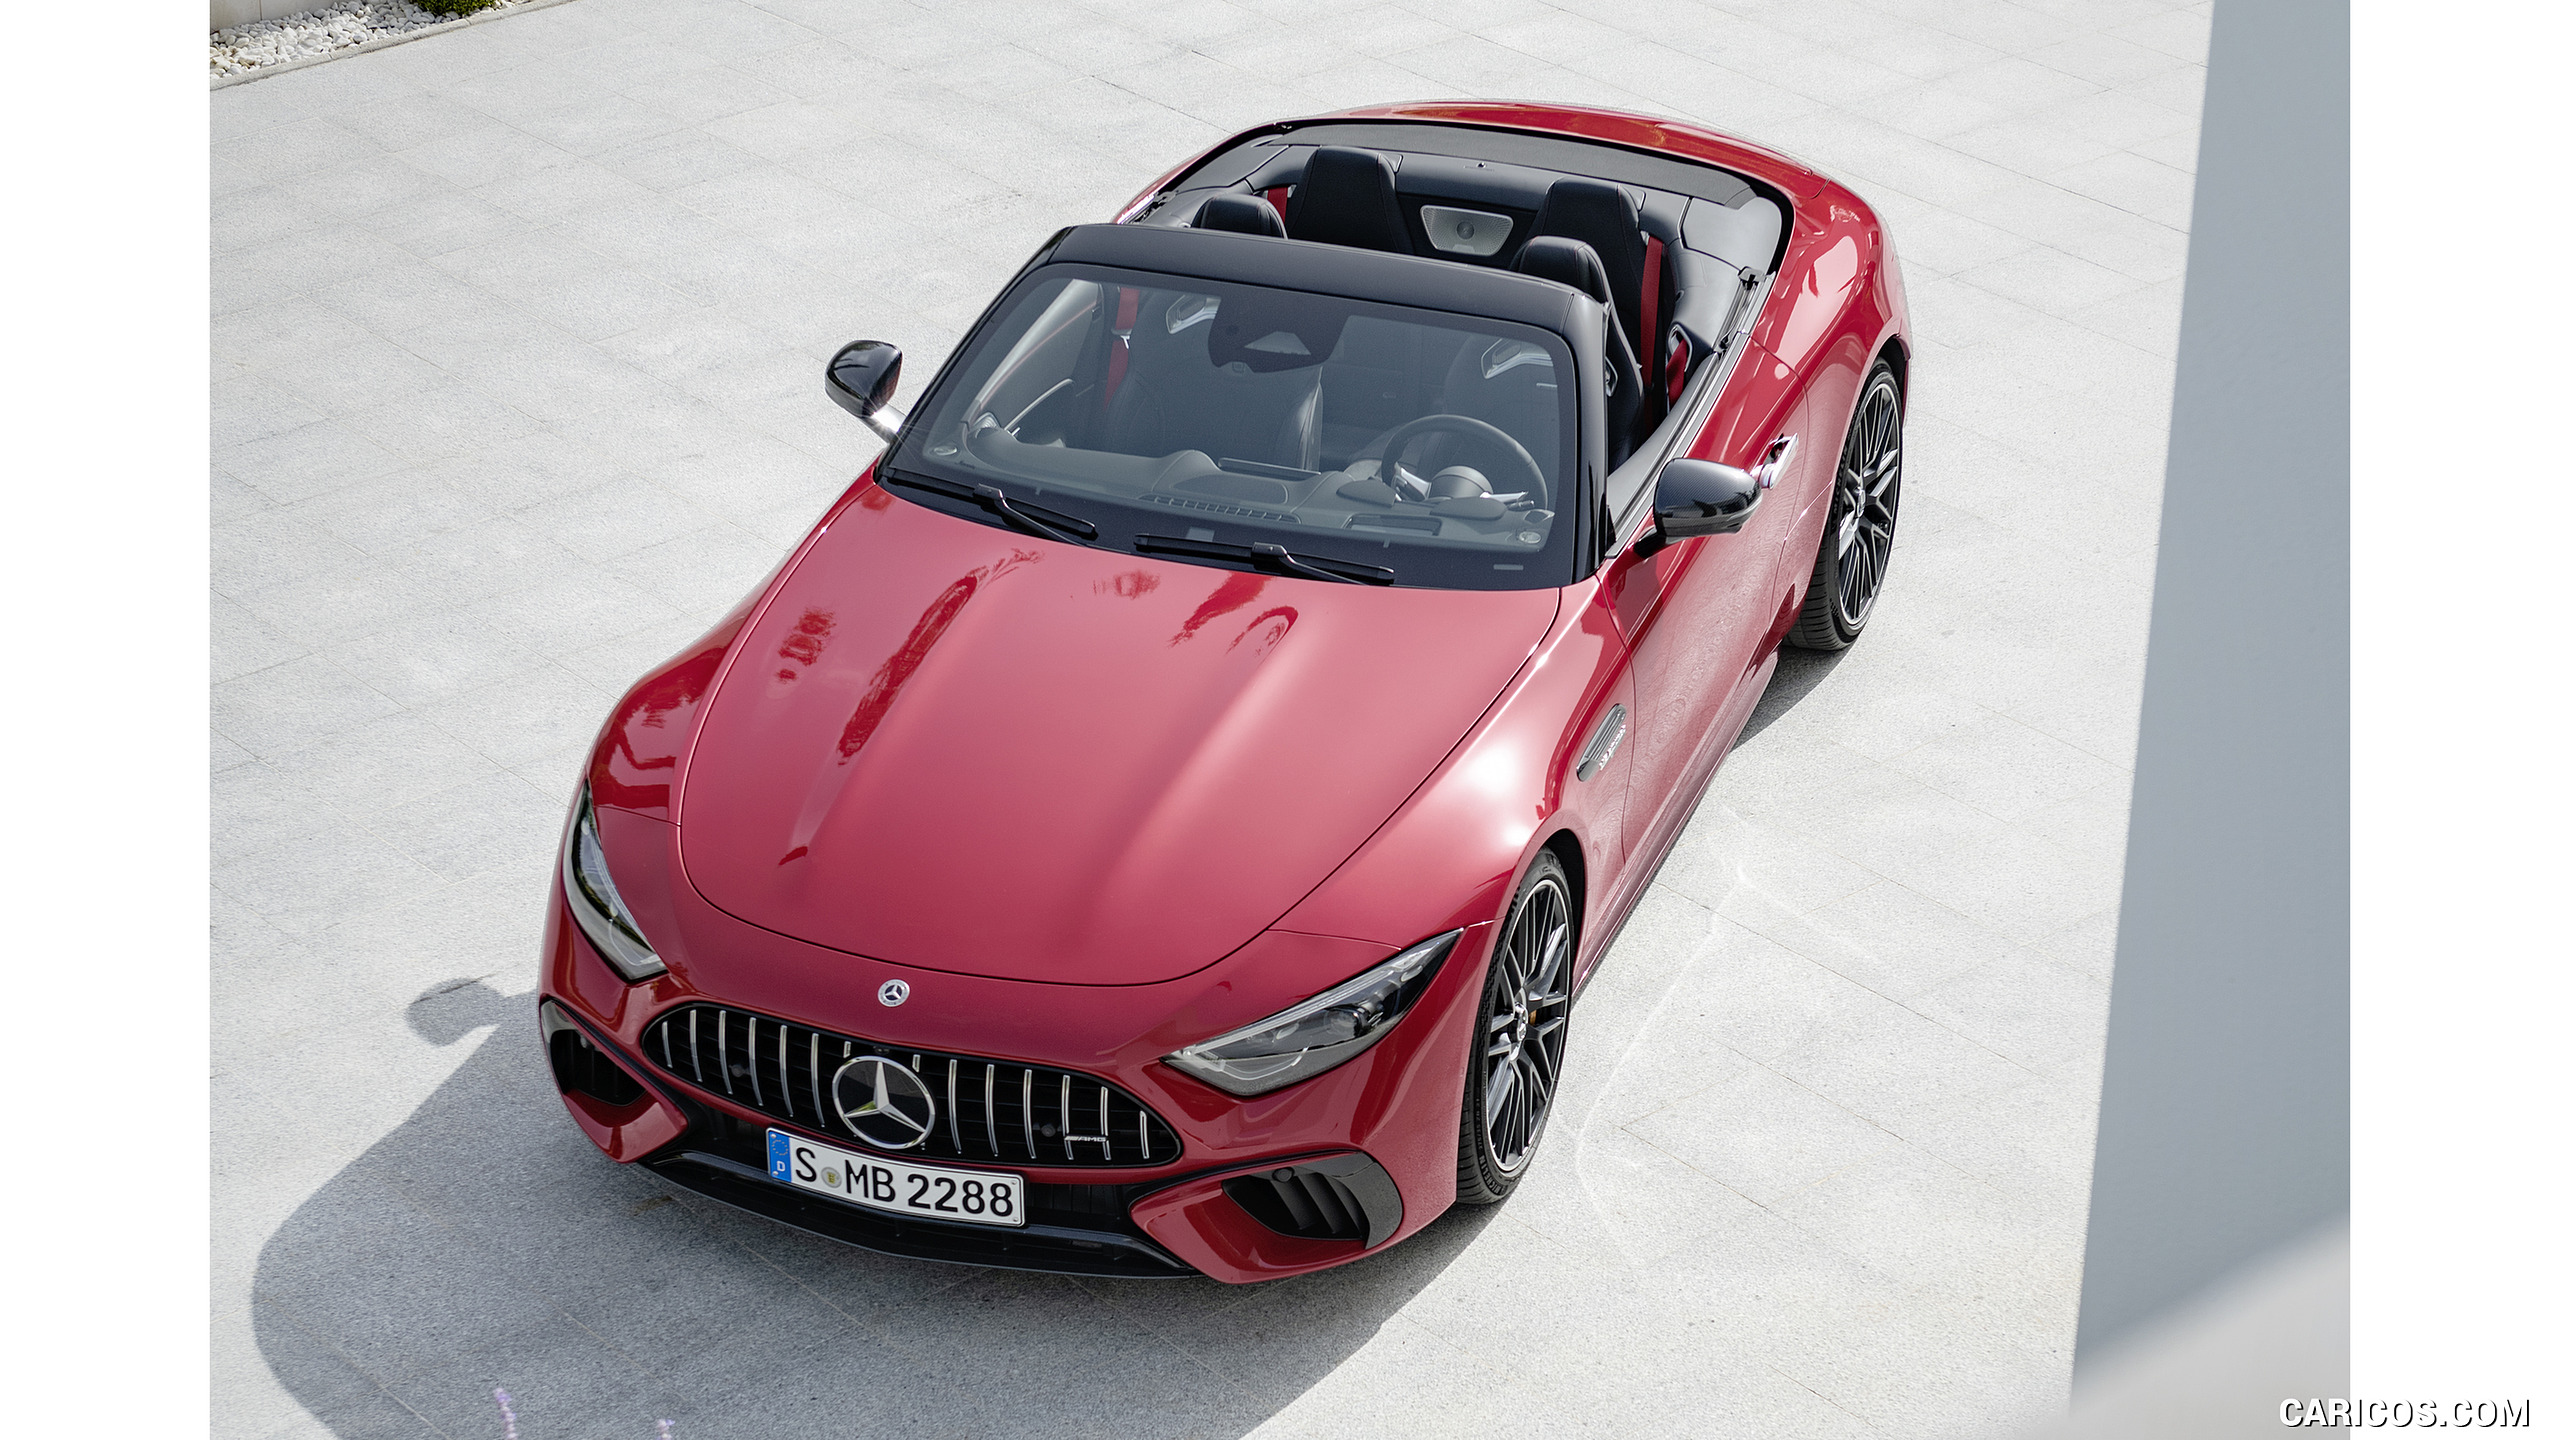 2022 Mercedes-AMG SL 63 4MATIC+ (Color: Patagonia Red Metallic) - Top, #18 of 235